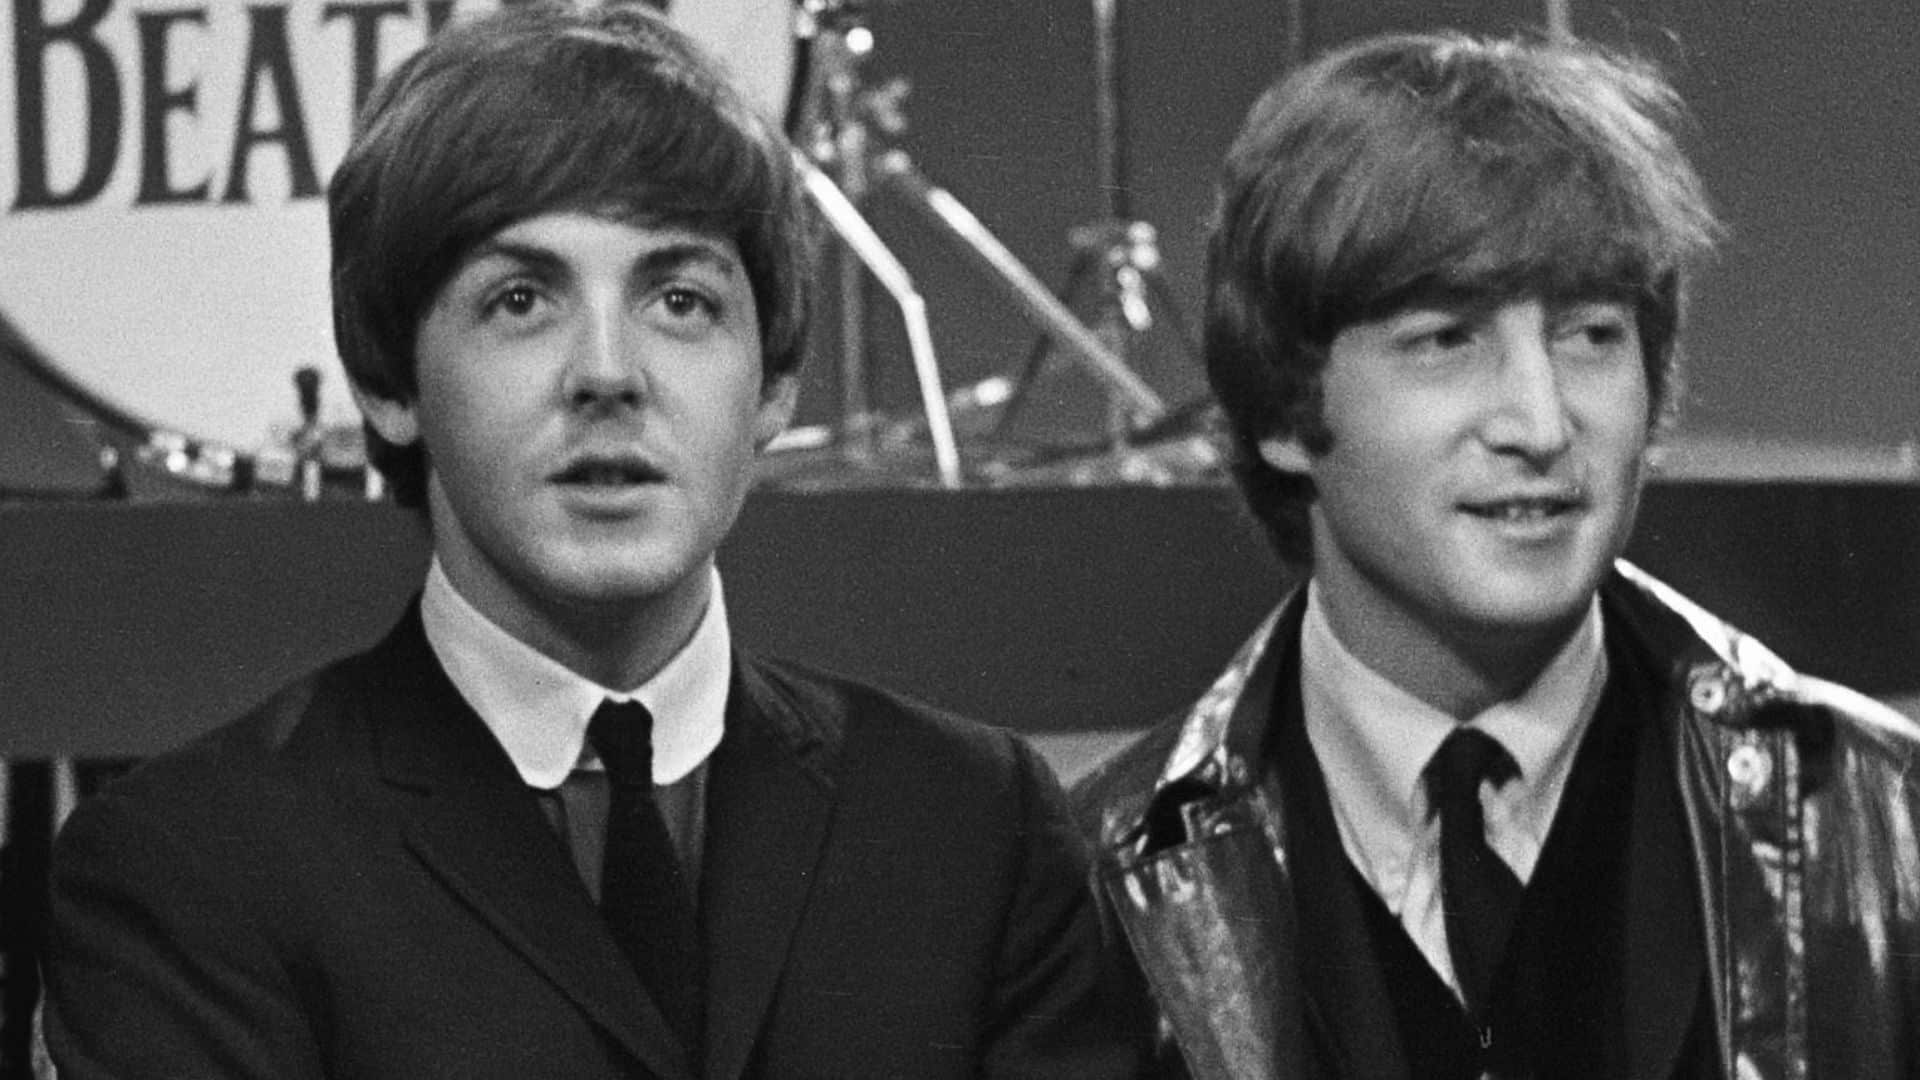 Paul McCartney finishes final Beatles record thanks to AI Technology